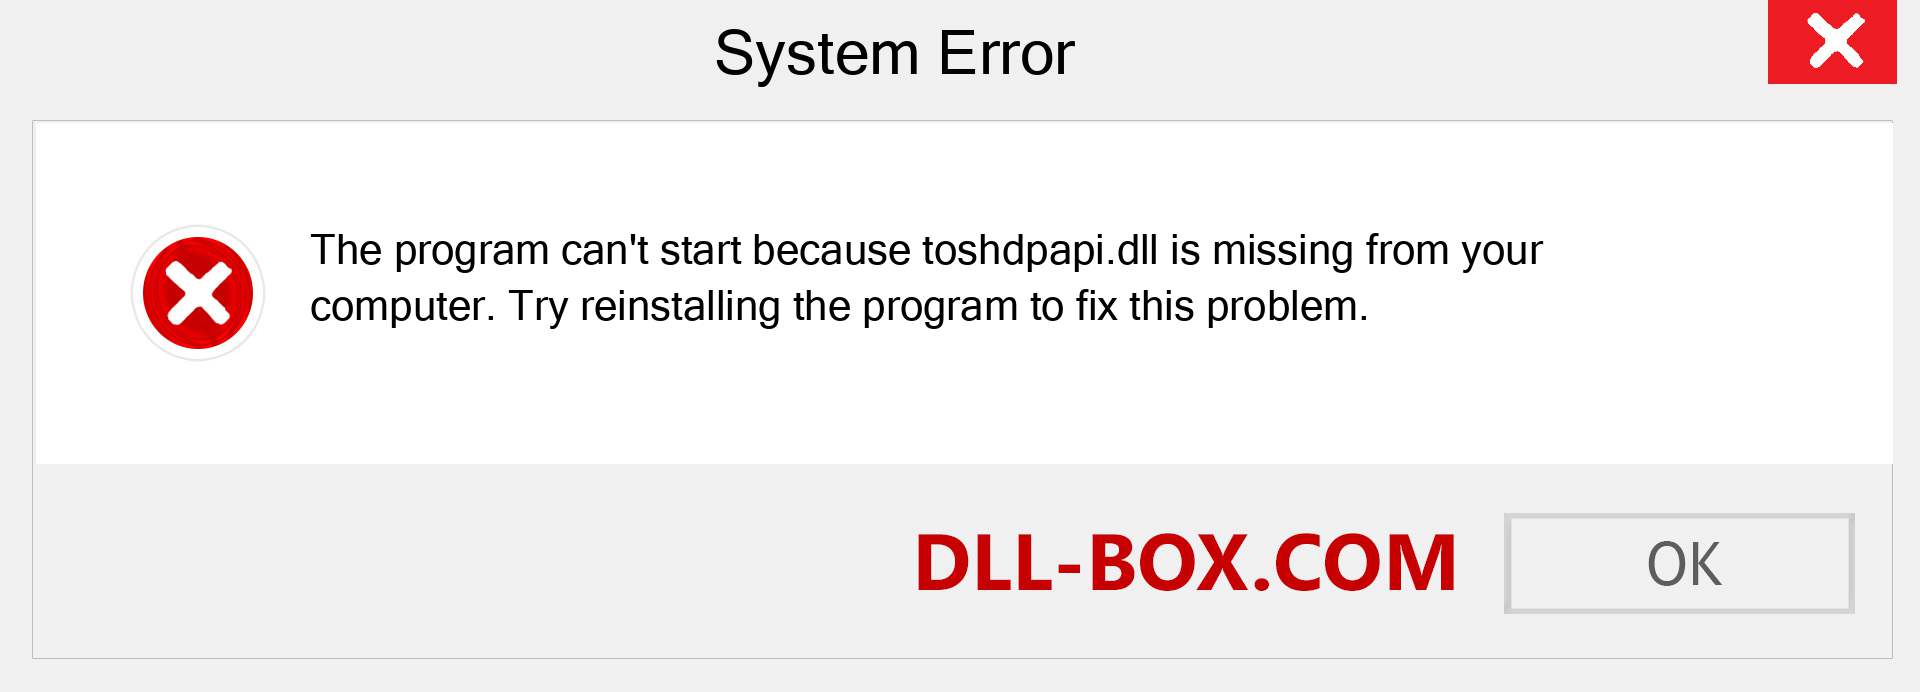  toshdpapi.dll file is missing?. Download for Windows 7, 8, 10 - Fix  toshdpapi dll Missing Error on Windows, photos, images